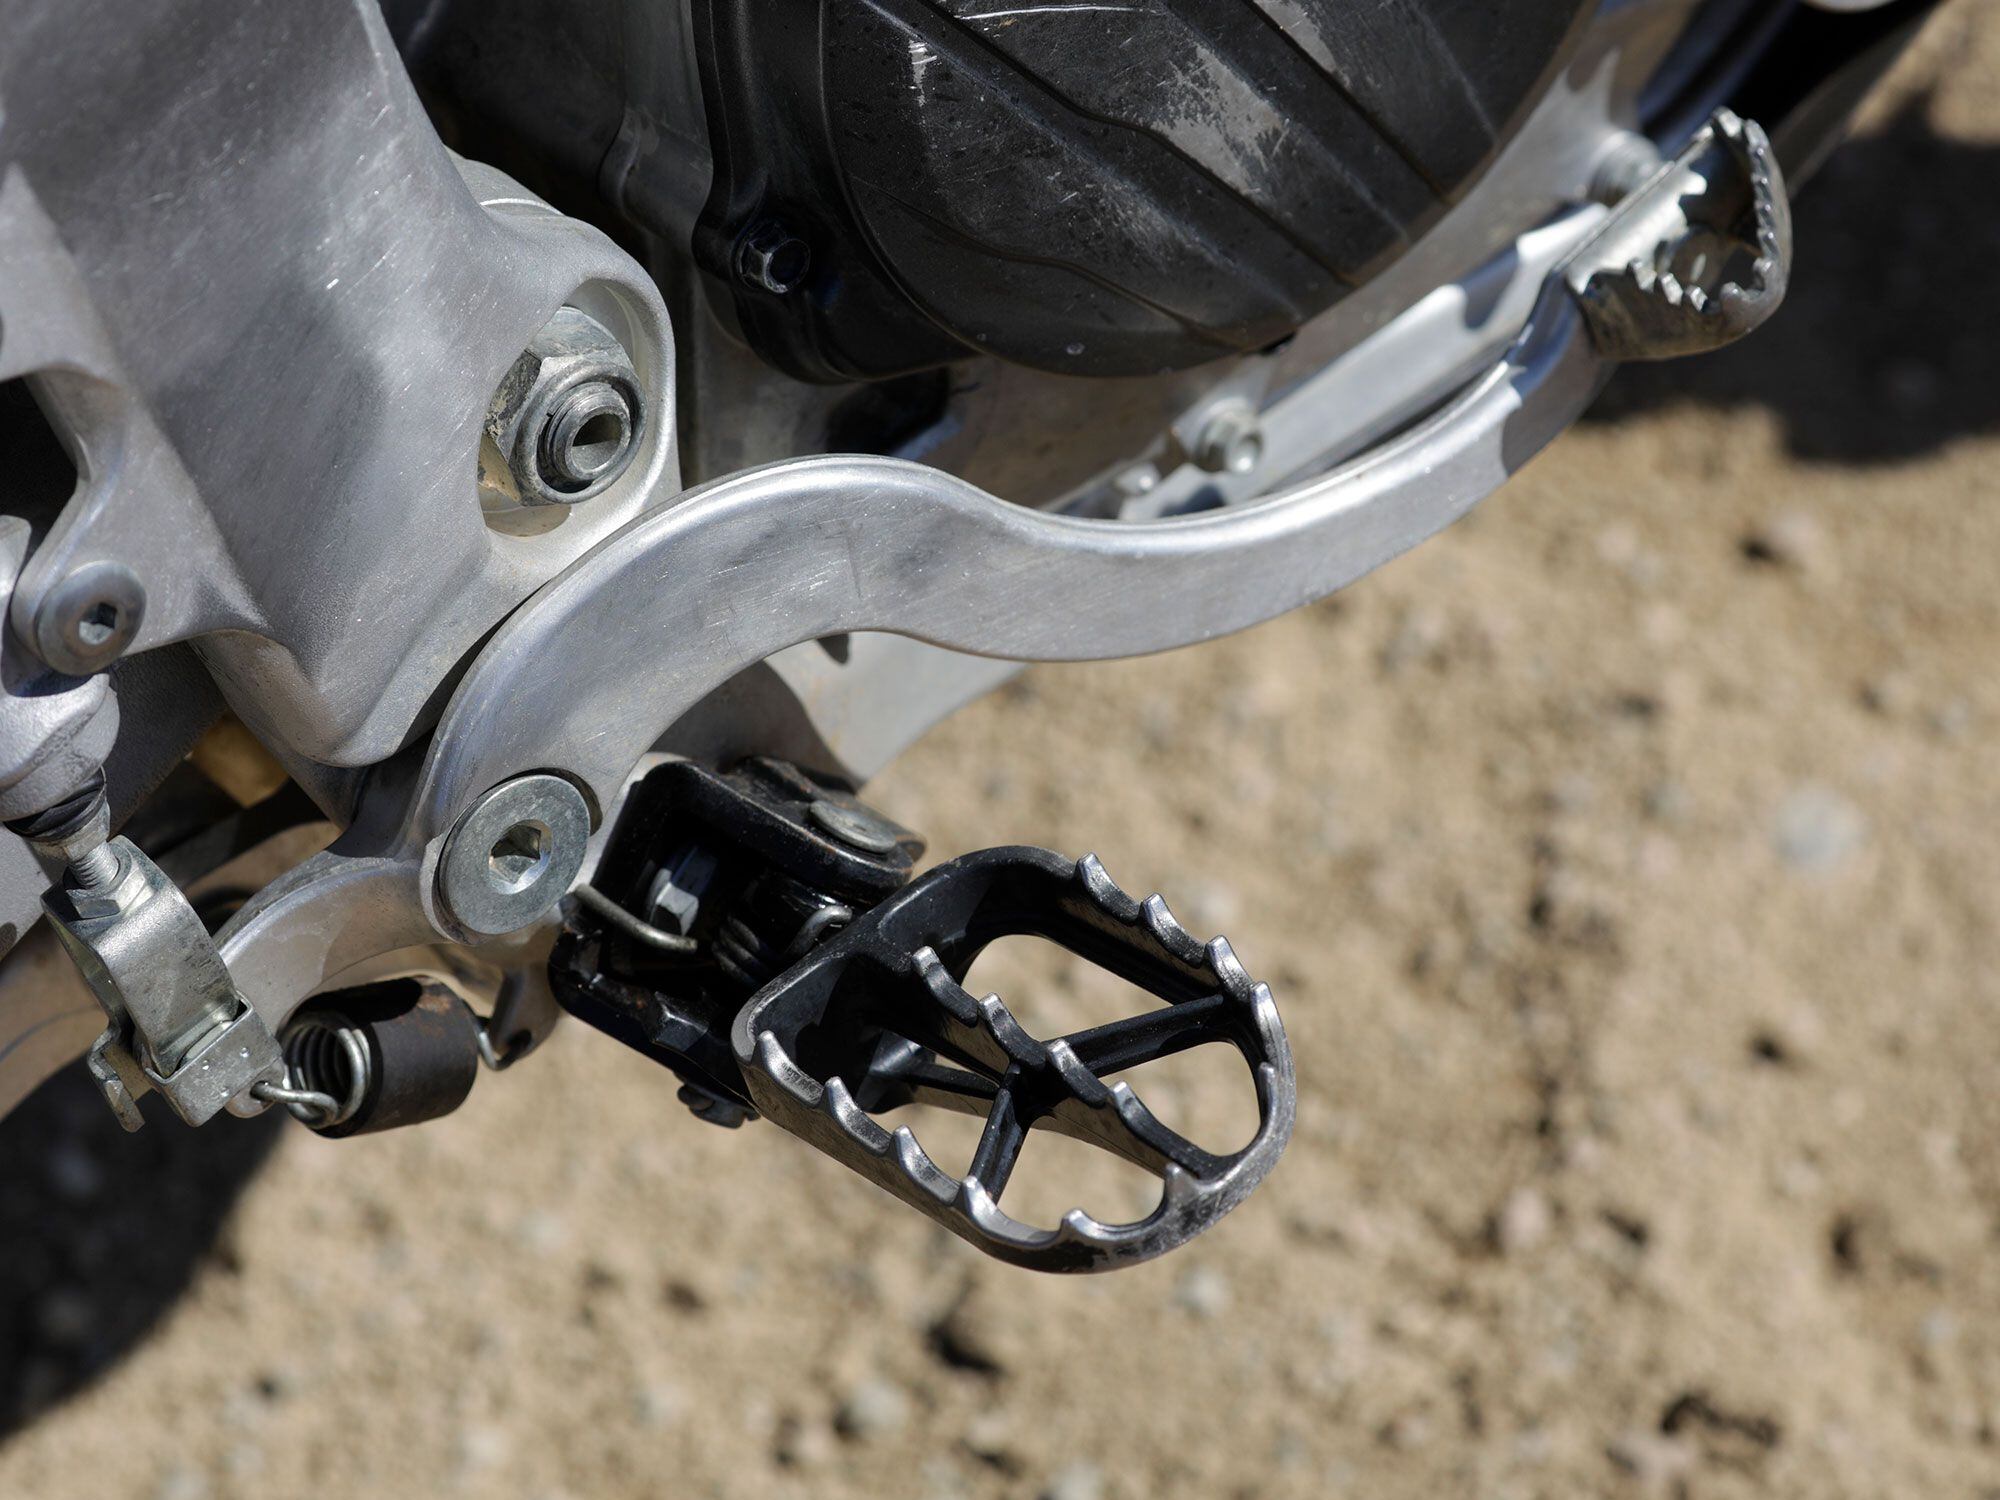 A sturdy set of footpegs provide good grip against the rider’s boots.